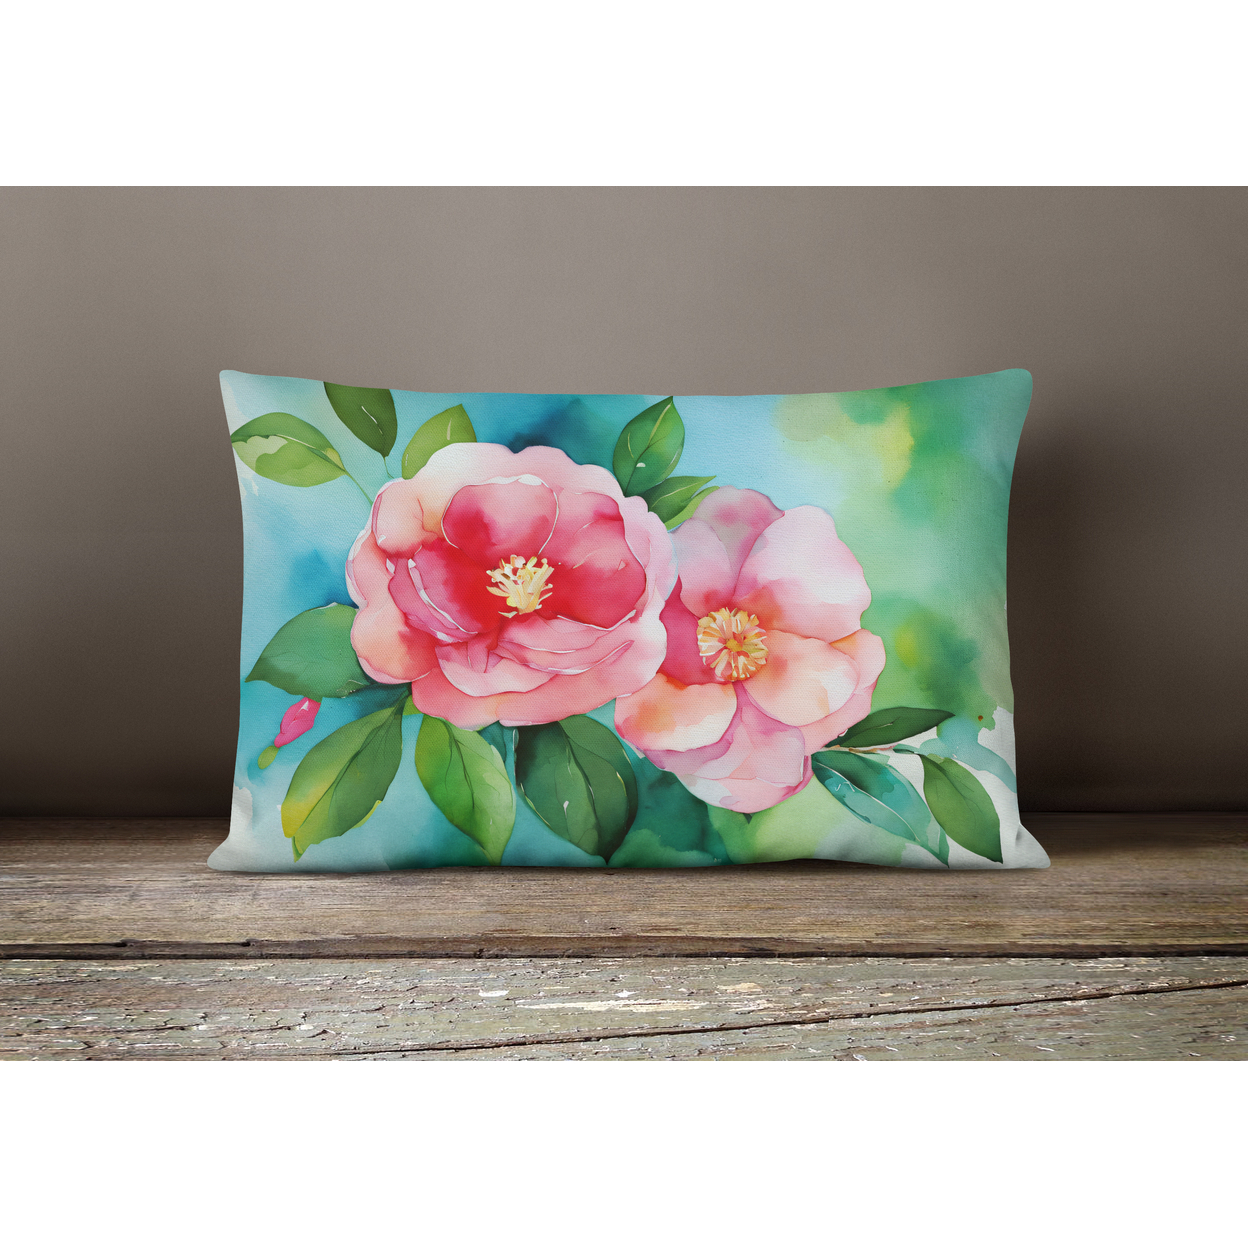 Alabama Camellia in Watercolor Fabric Decorative Pillow 12 in x 16 in - image 4 of 4